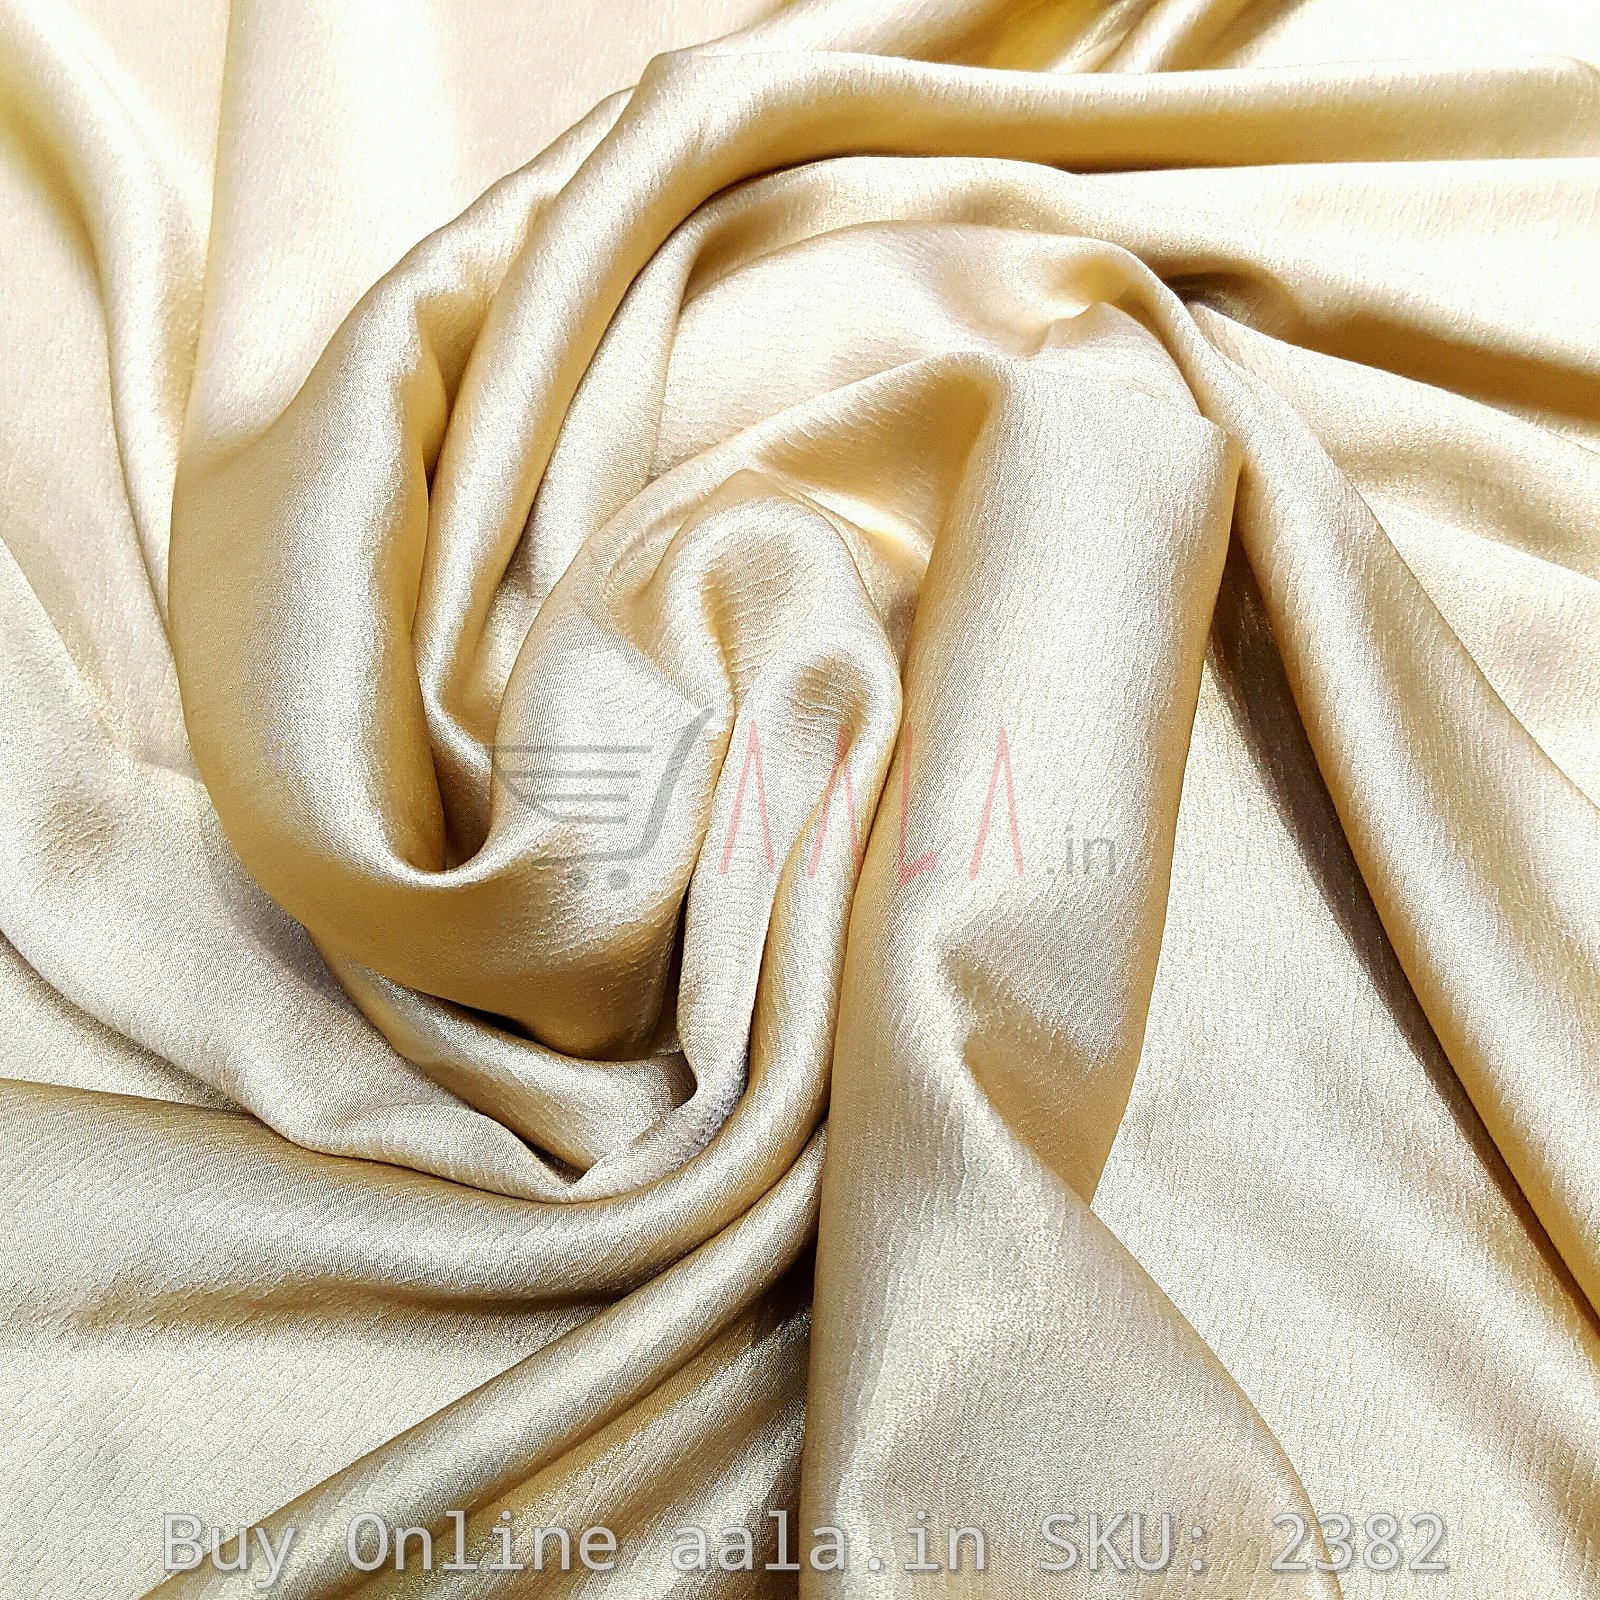 Foil Crush Satin Georgette Poly-ester 44 Inches Dyed Per Metre #2382